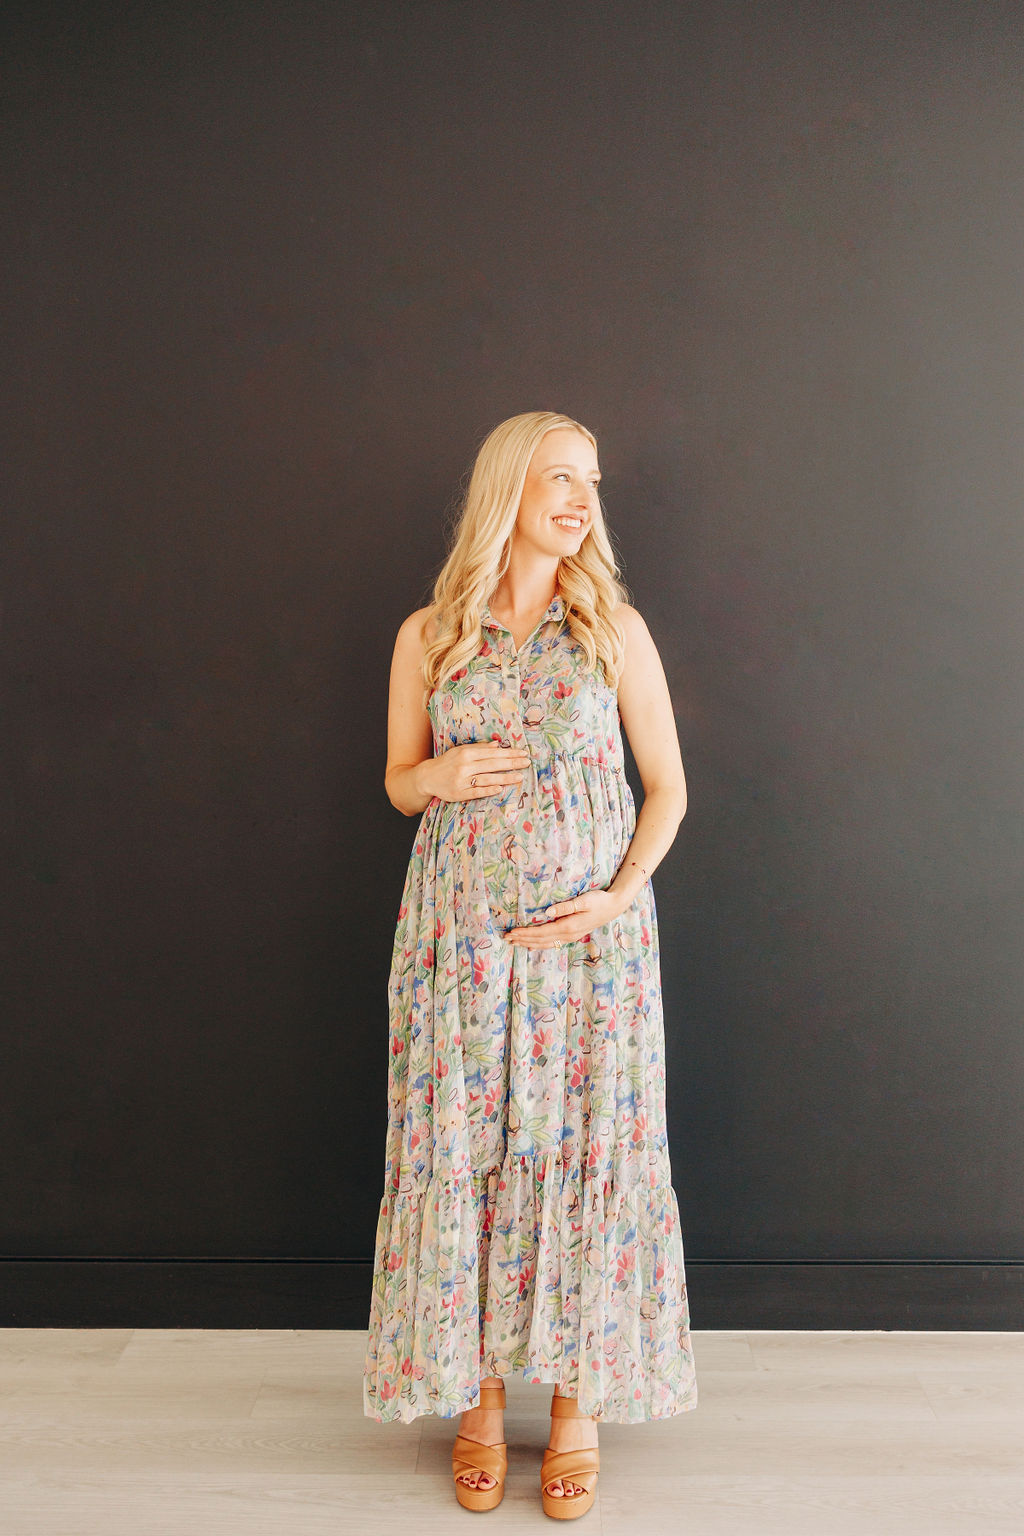 A mom to be looks over her shoulder in a colorful maternity dress in a studio